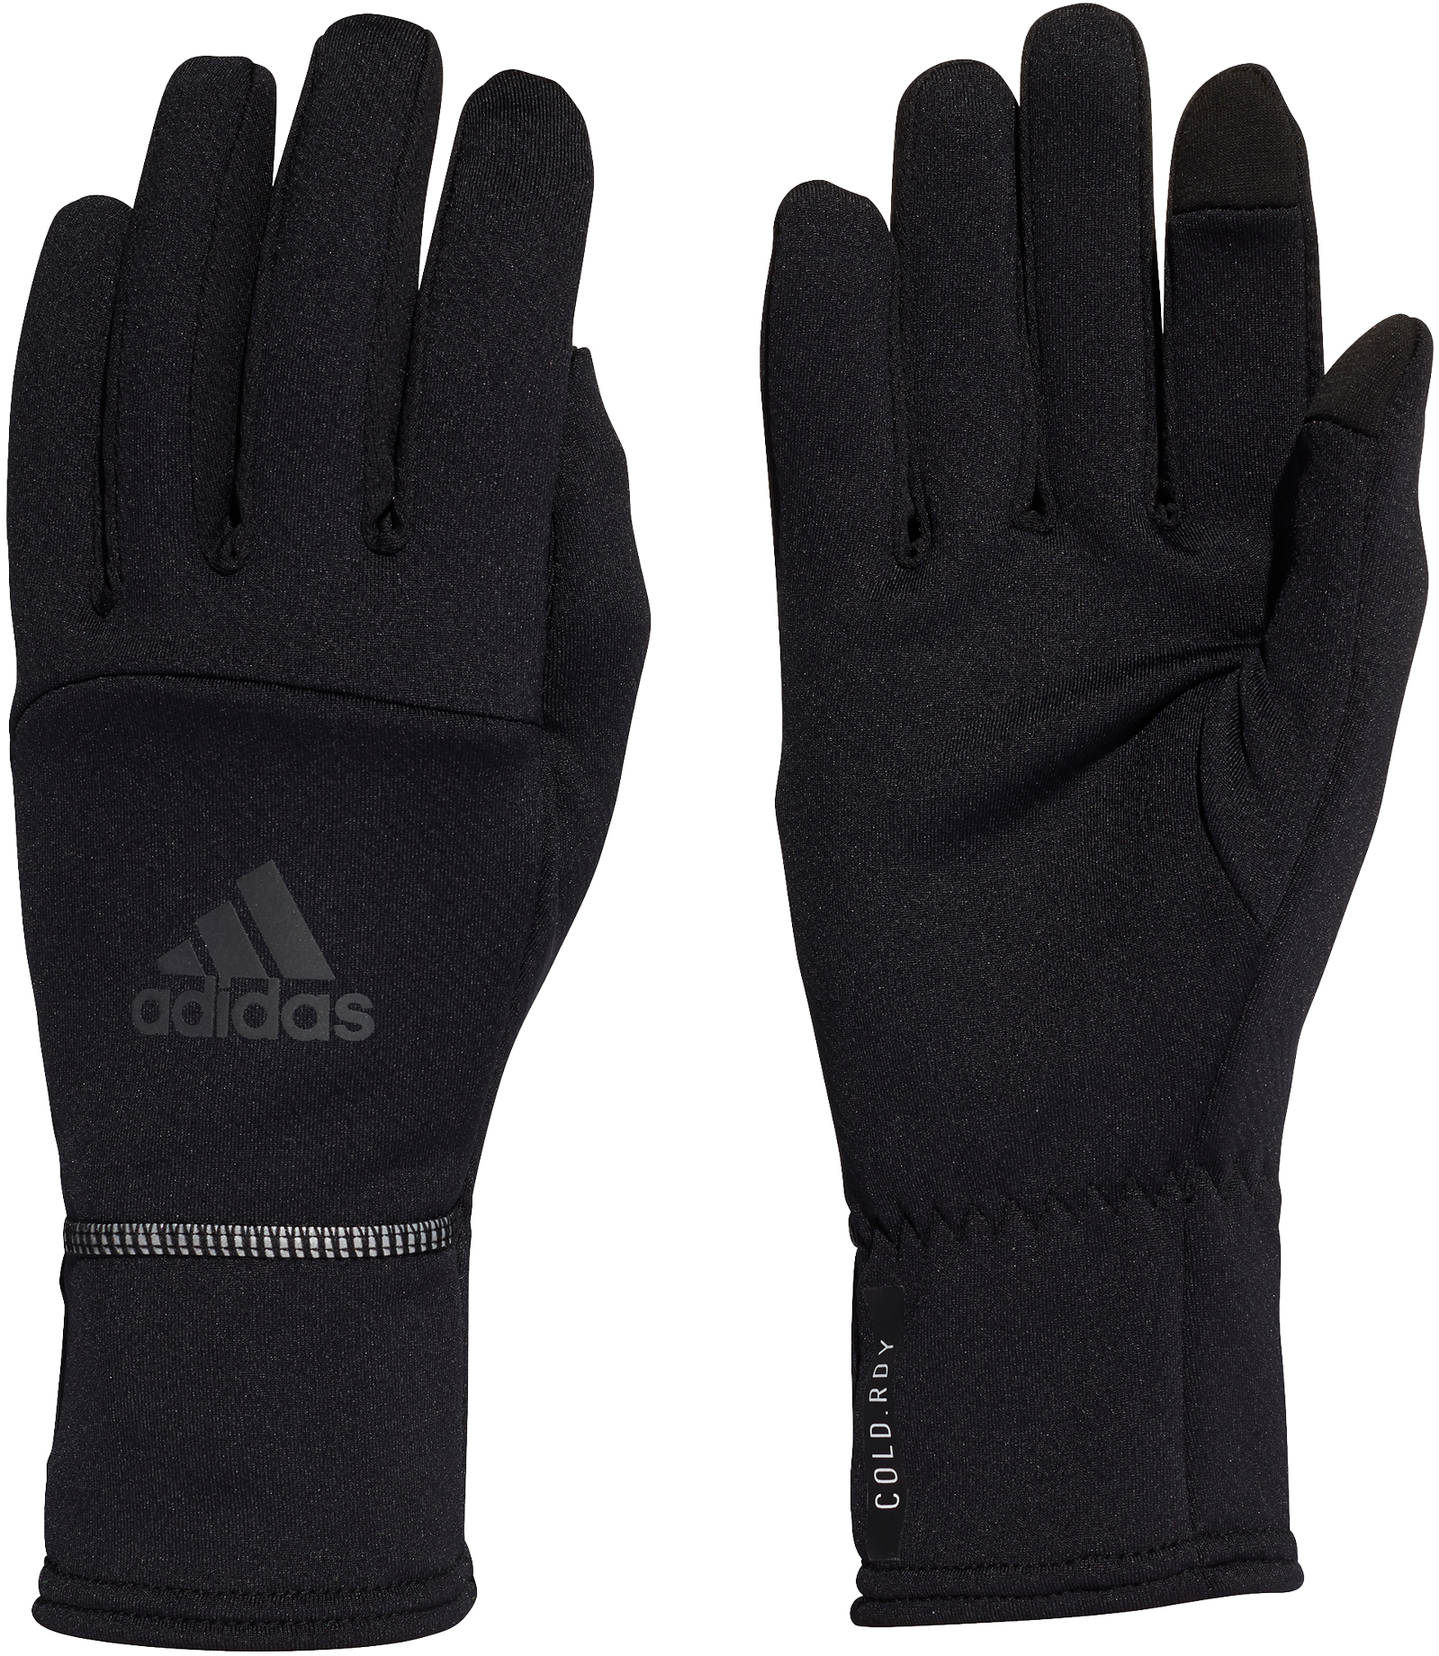 Handschuhe adidas GLOVES COLD.RDY